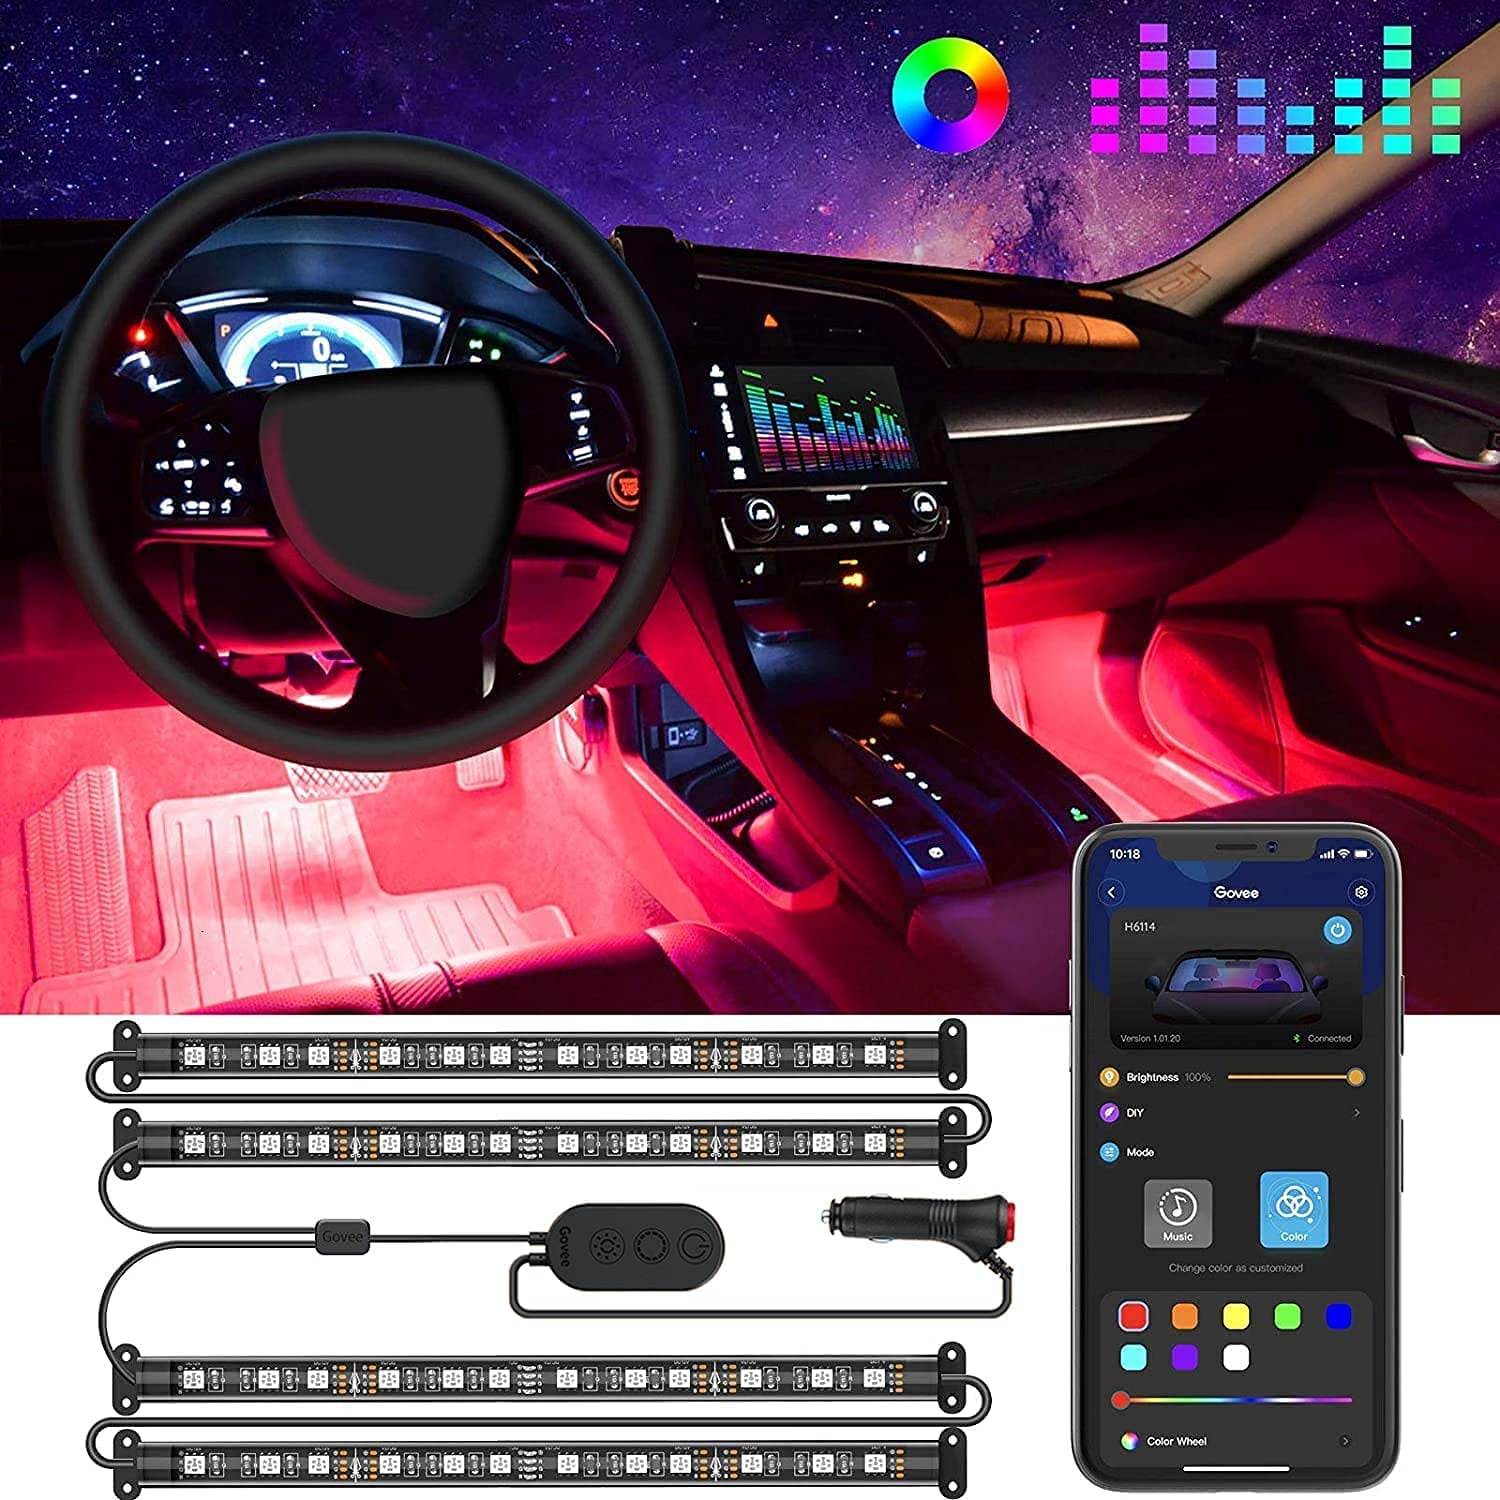 LSENLTY Interior Lights for Car Waterproof LED Interior Lights with 2 Lines Design App Control Smart Car Lights with DIY Mode and Music Mode RGB Under Dash Car LED Lights with Car Charger DC 12V 